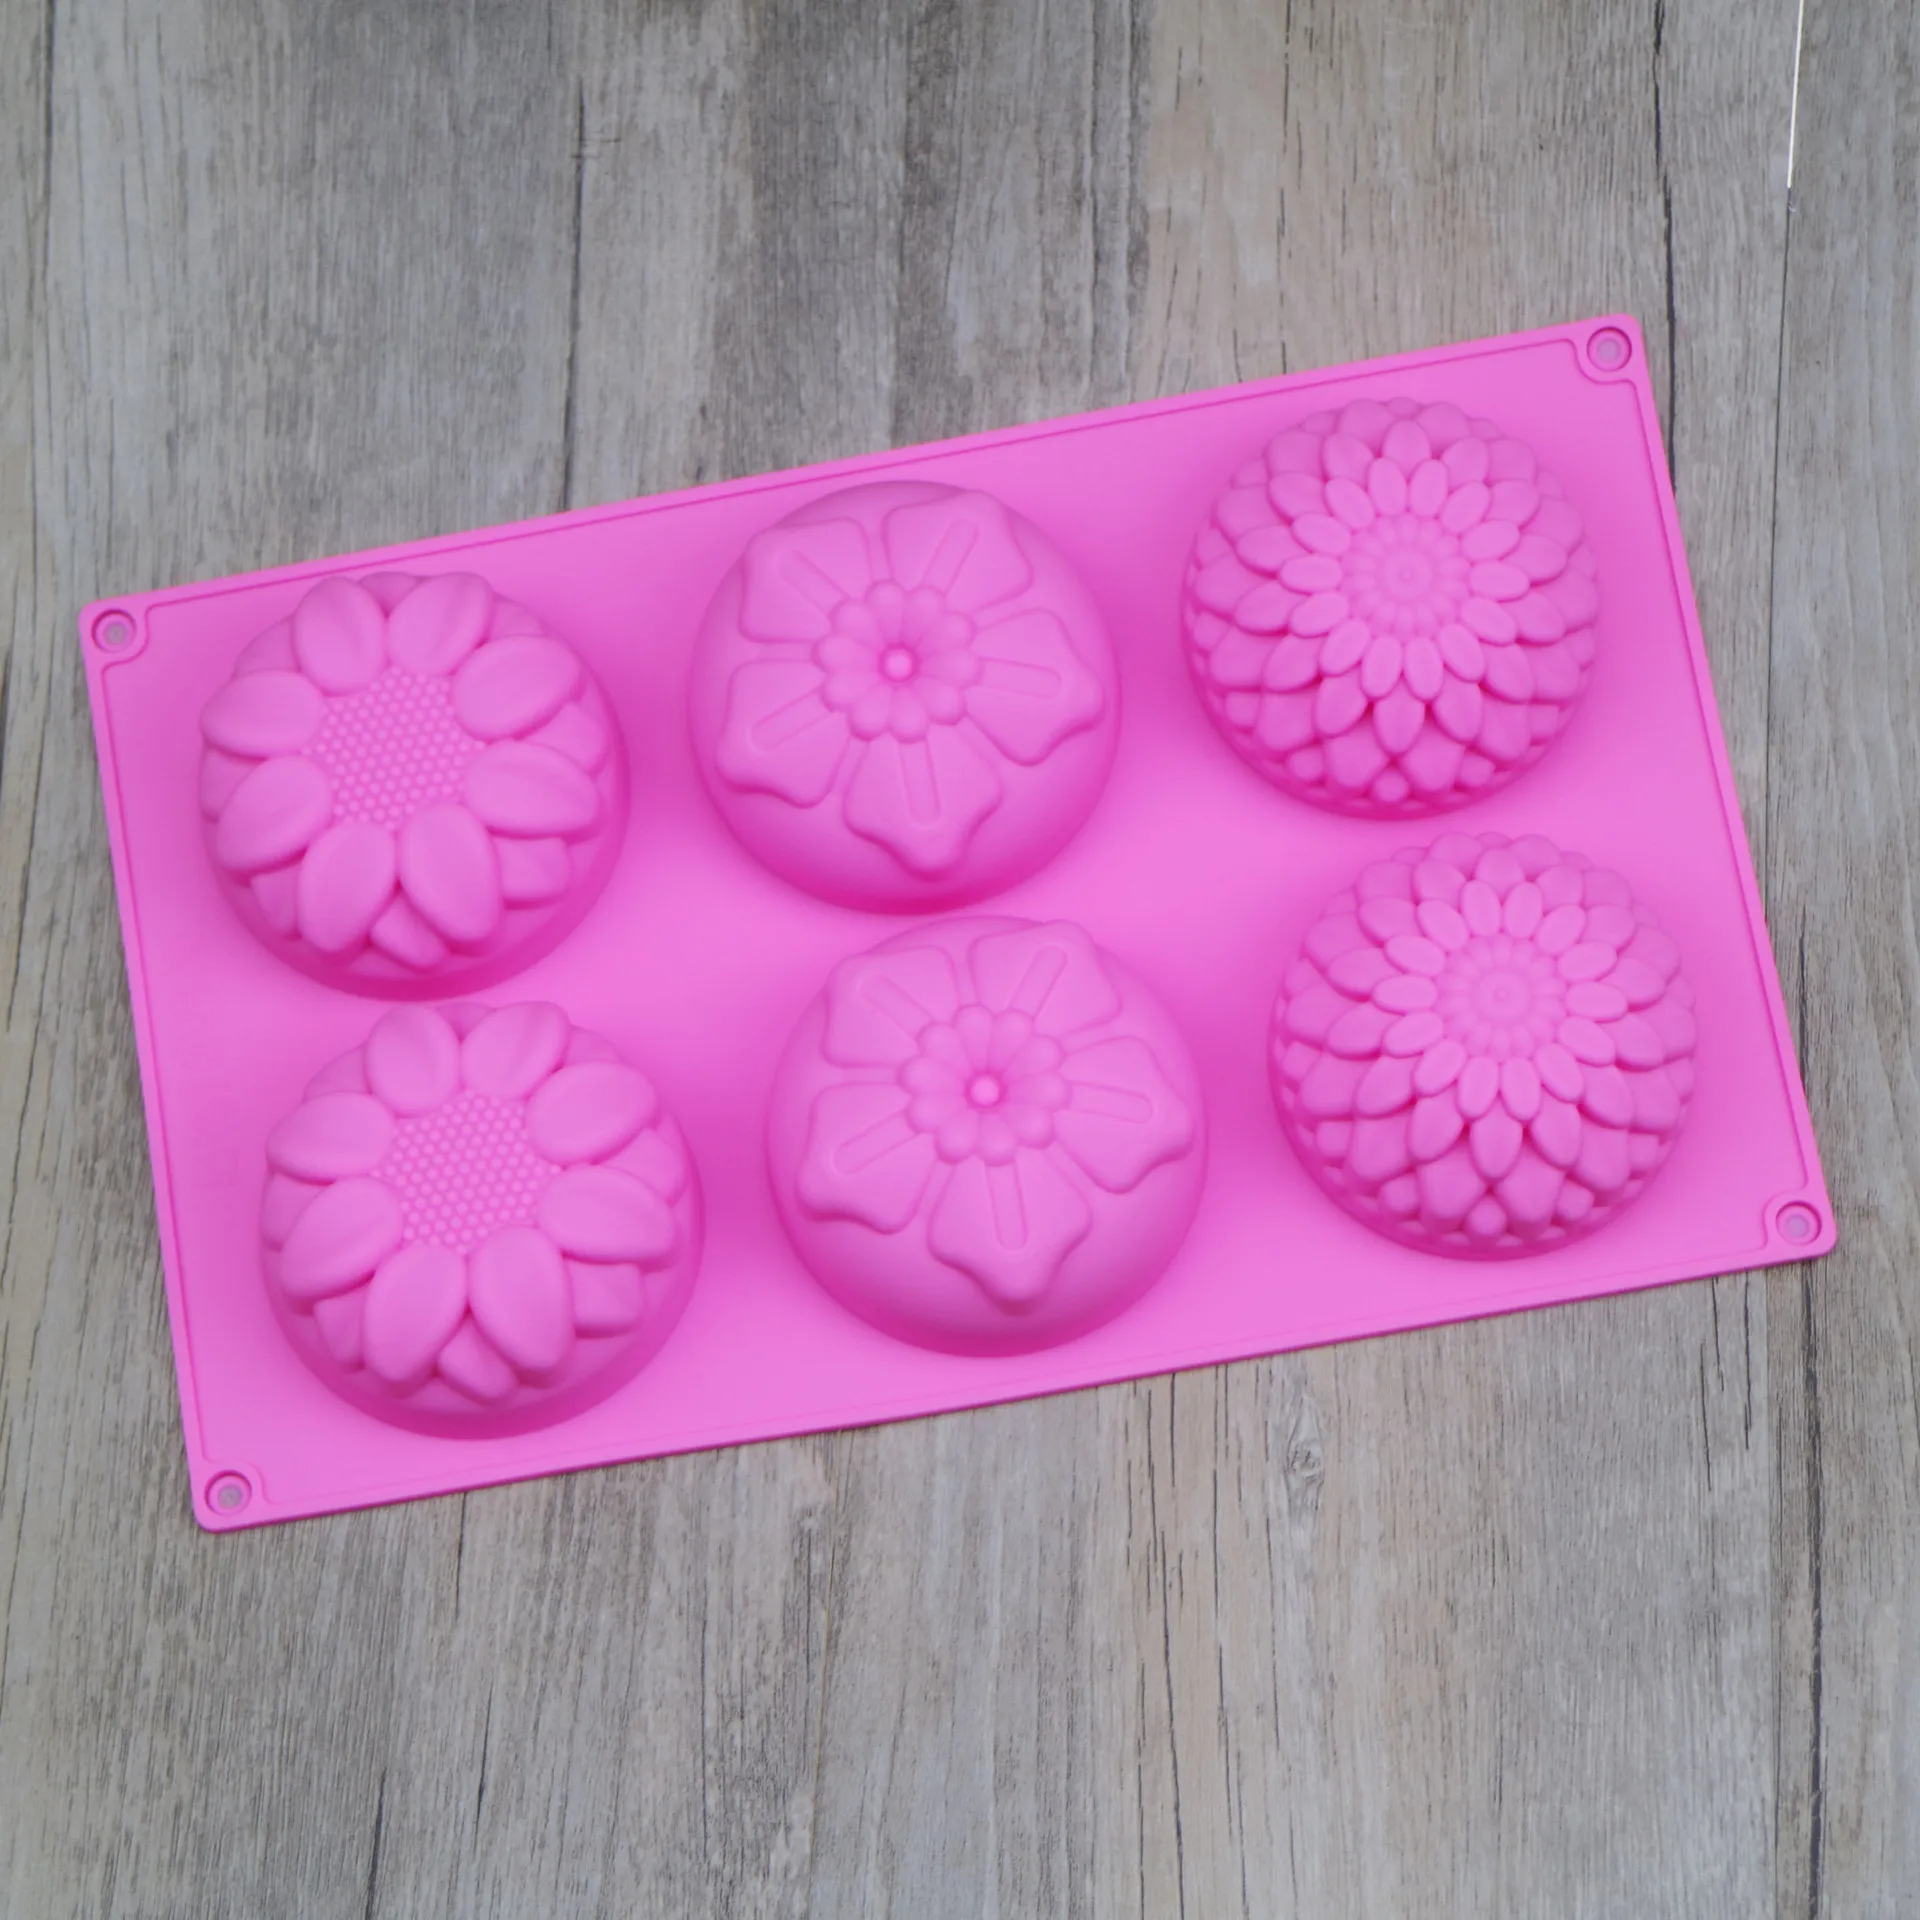 

Silicone Baking Tool 3 Different Patterns Flower Shape Ice Skin Moon Cake Mold DIY Chocolate Mousse Soap Jelly Pudding Mold